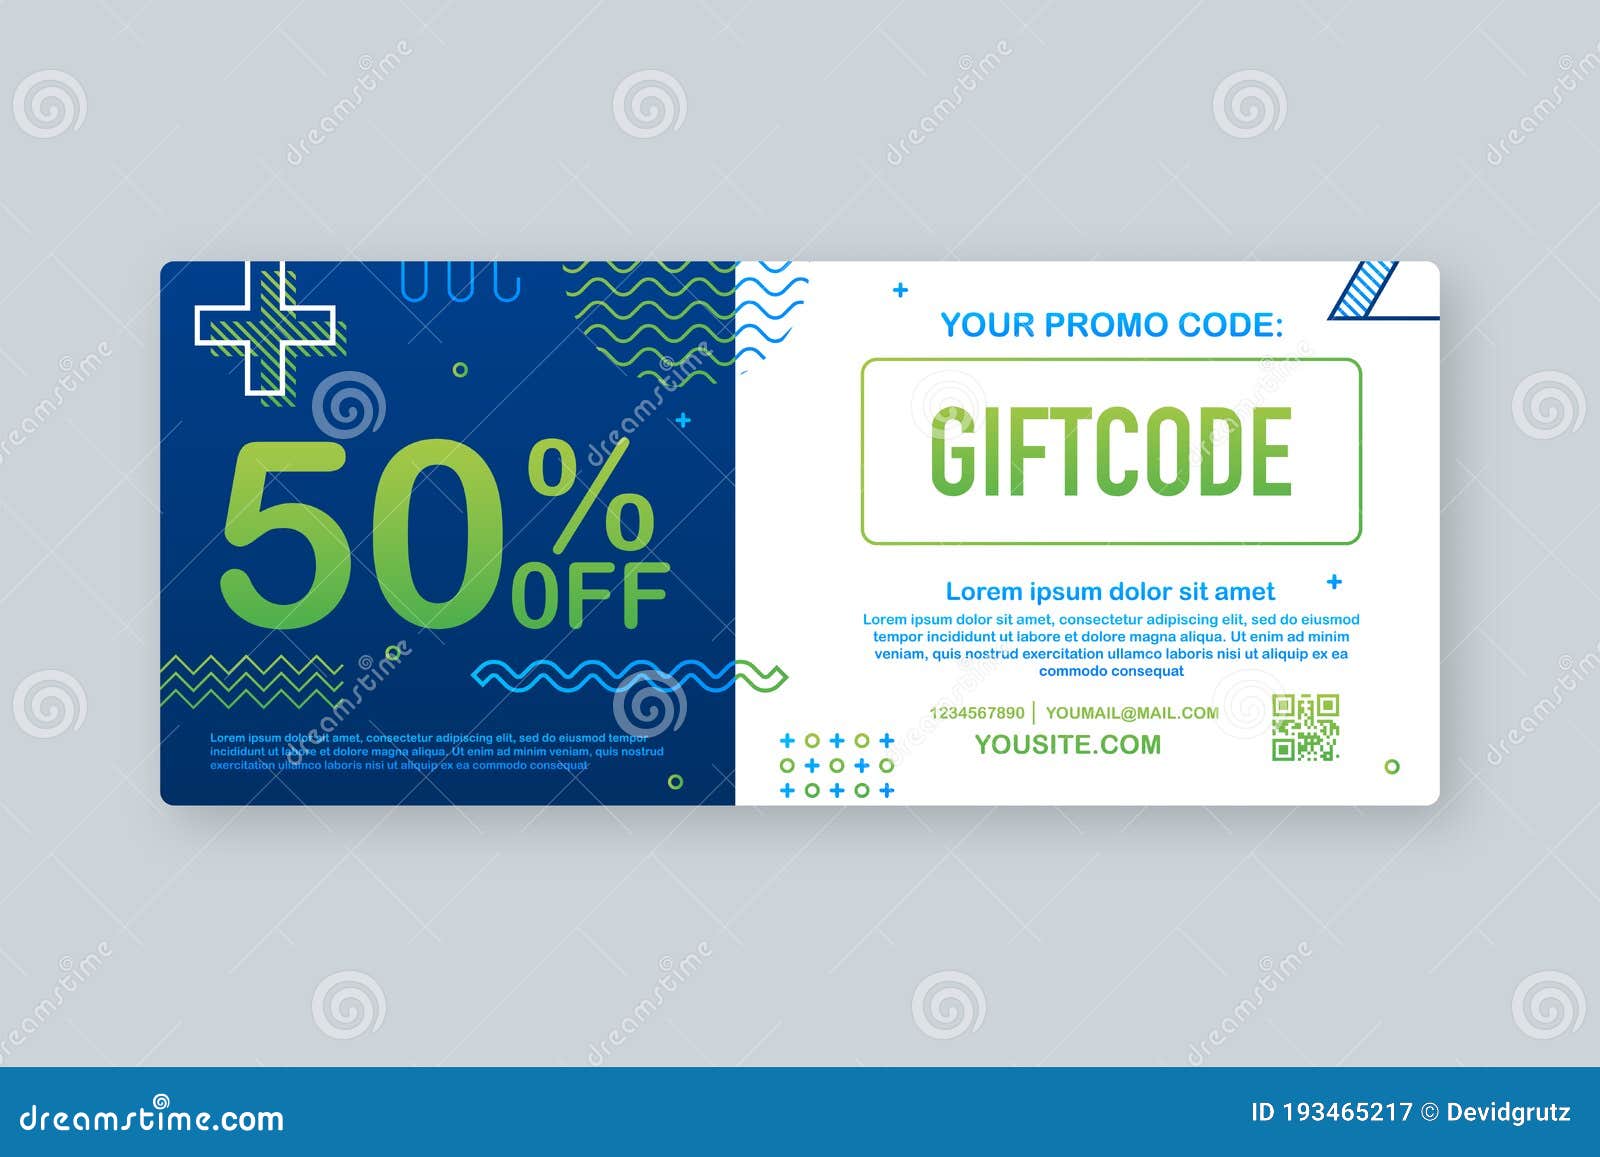 Everything You Need To Know About Online Coupon Codes